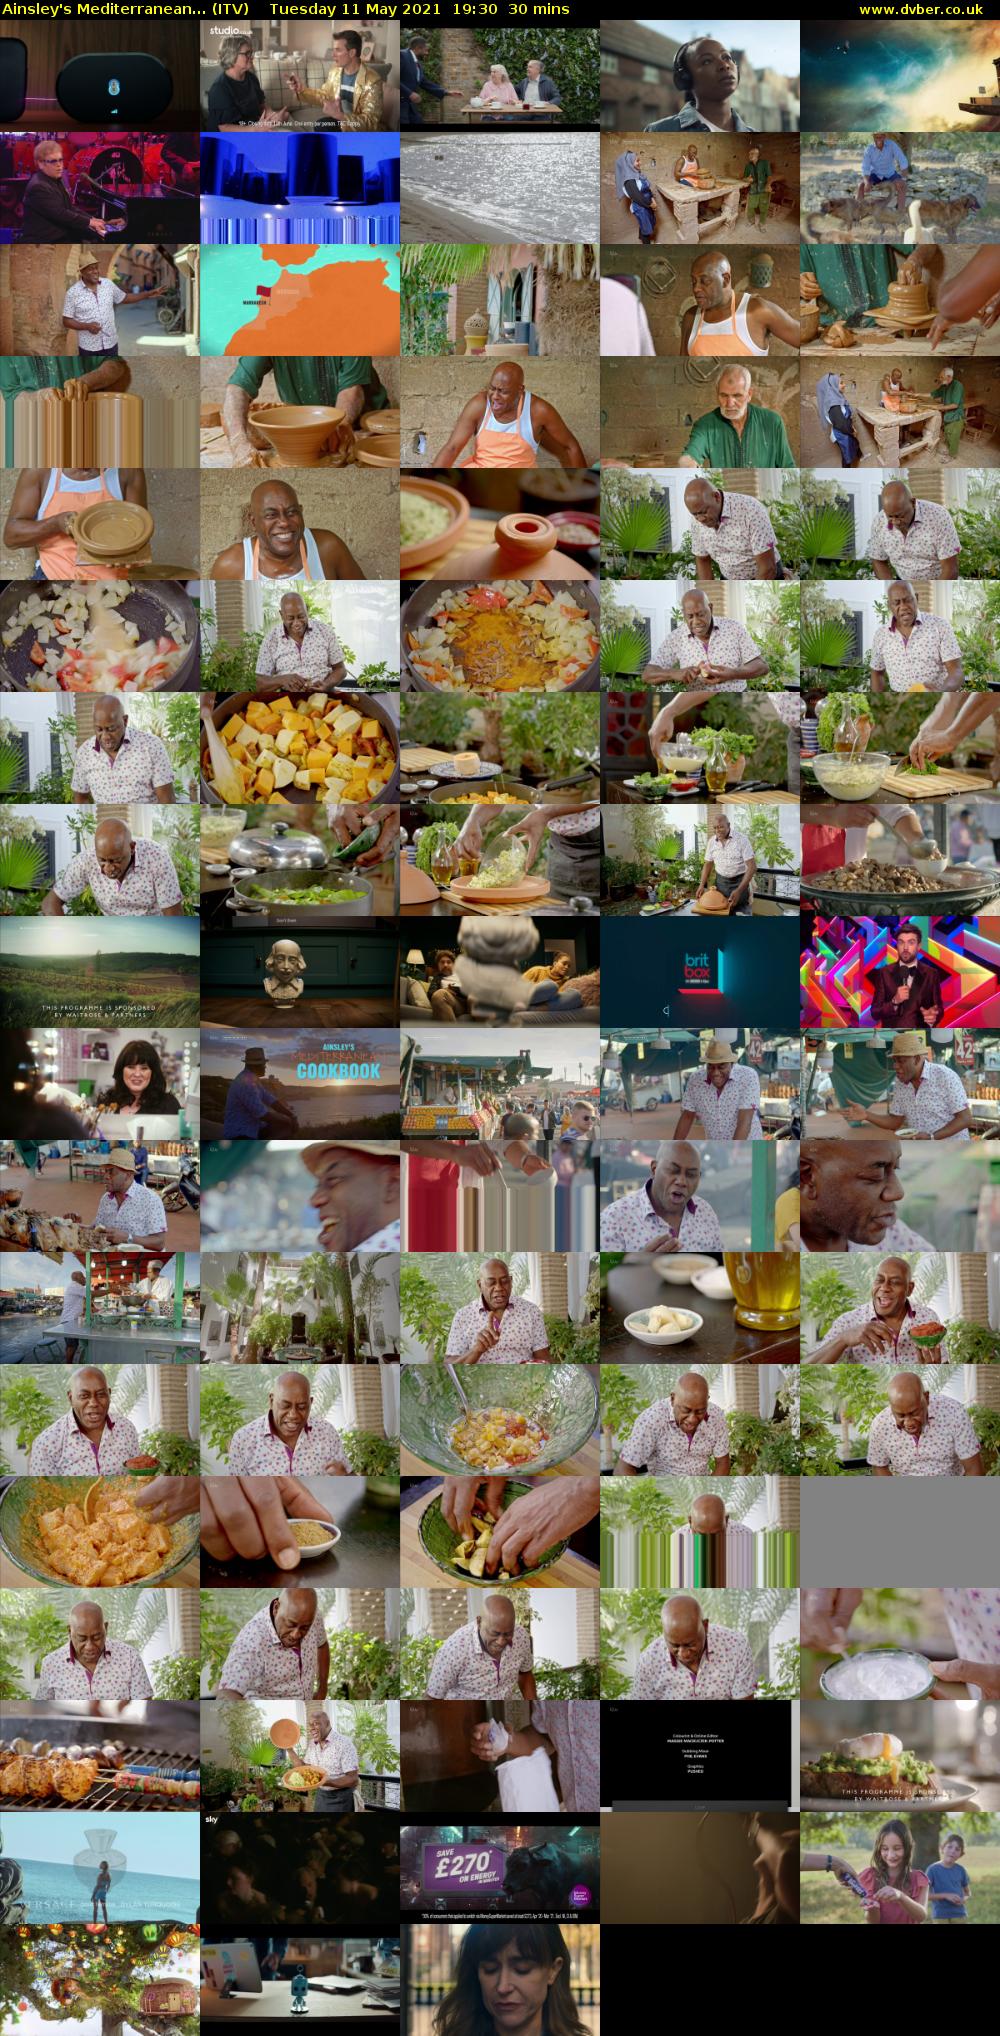 Ainsley's Mediterranean... (ITV) Tuesday 11 May 2021 19:30 - 20:00